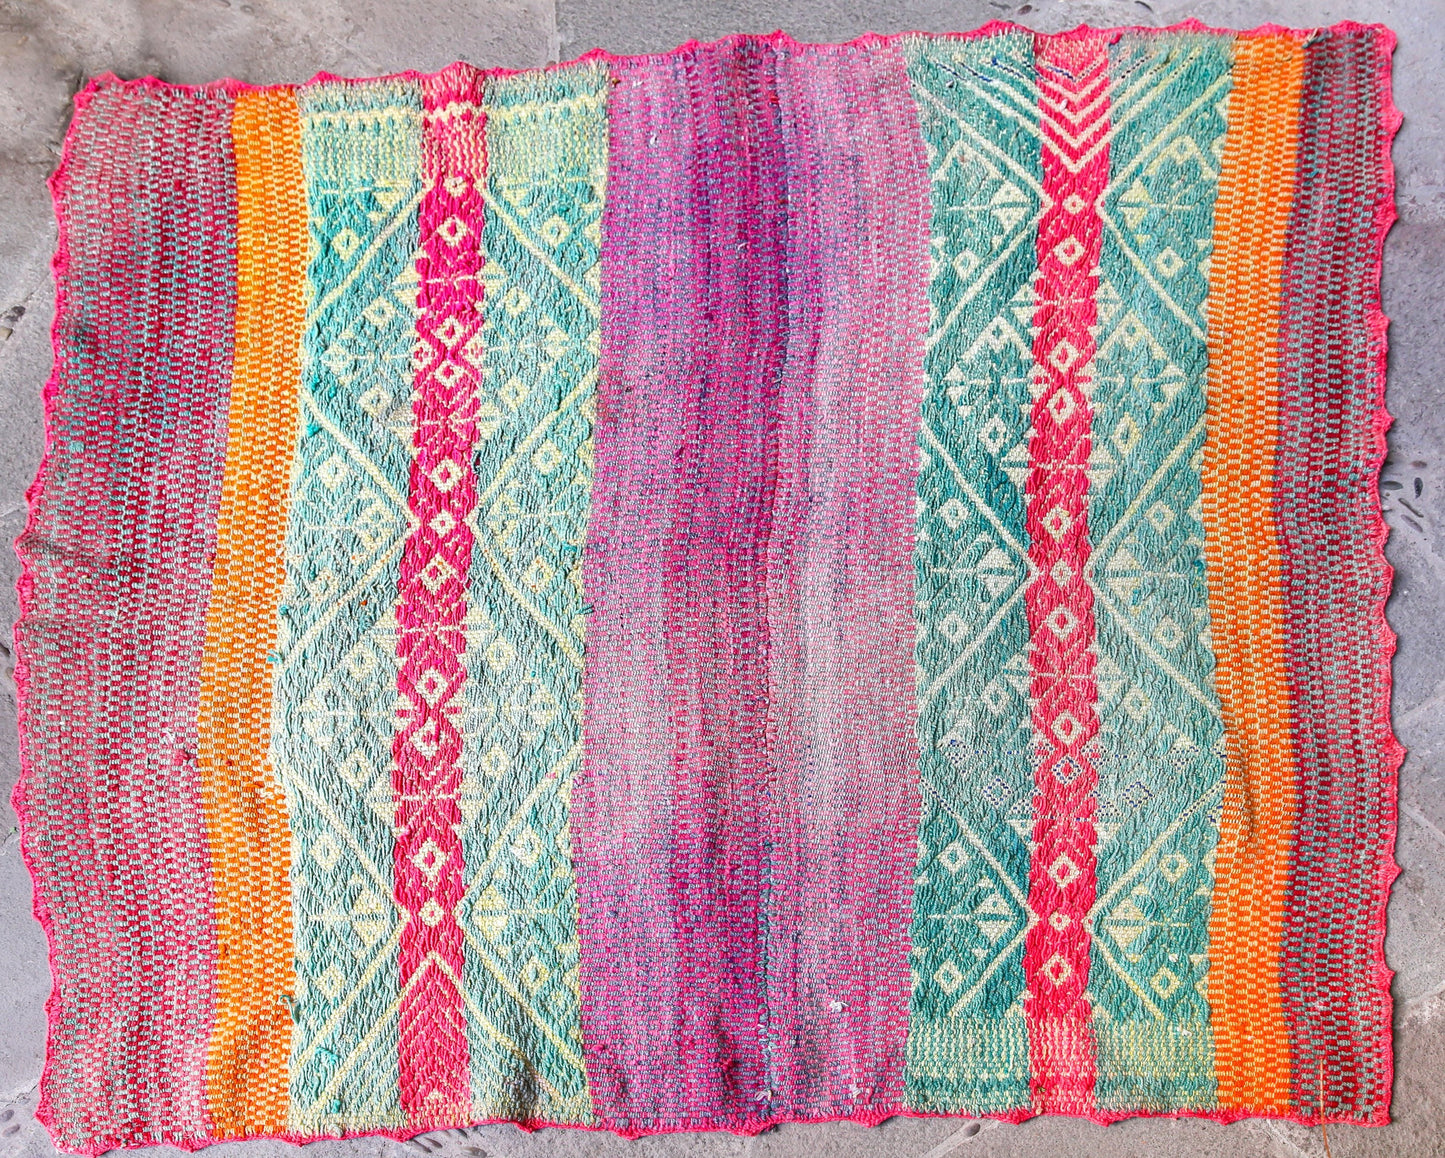 Handwoven Peruvian Frazada No. 008 - Canary Lane - Curated Textiles